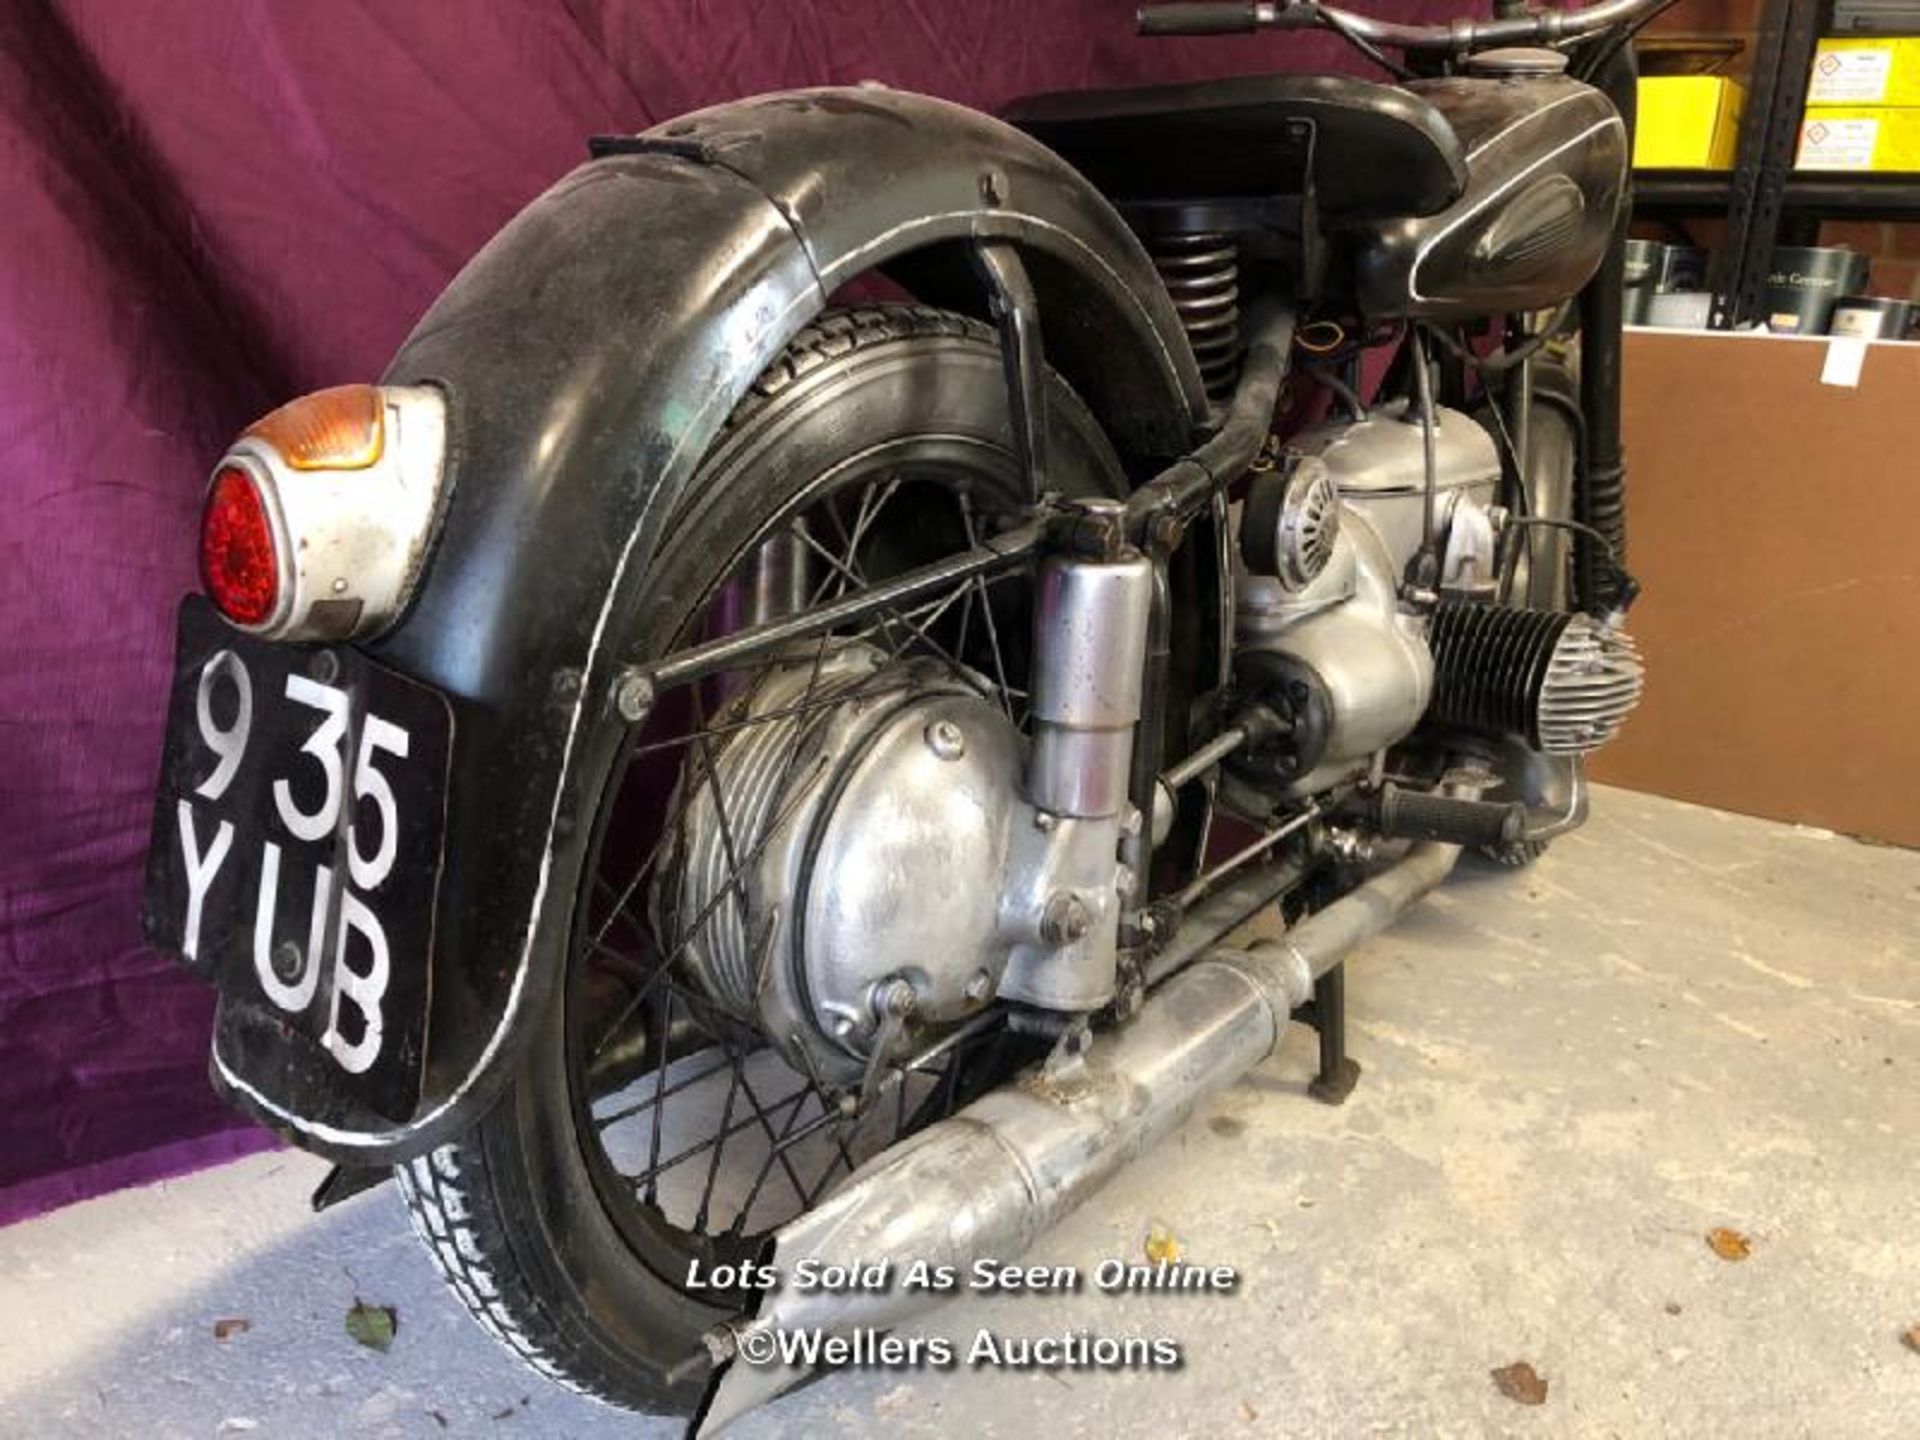 IFA 350 HORIZONTALLY OPPOSED TWIN CYLINDER 1954 MOTORCYCLE, TAX EXEMPT, RUNS WITH GOOD - Bild 3 aus 12